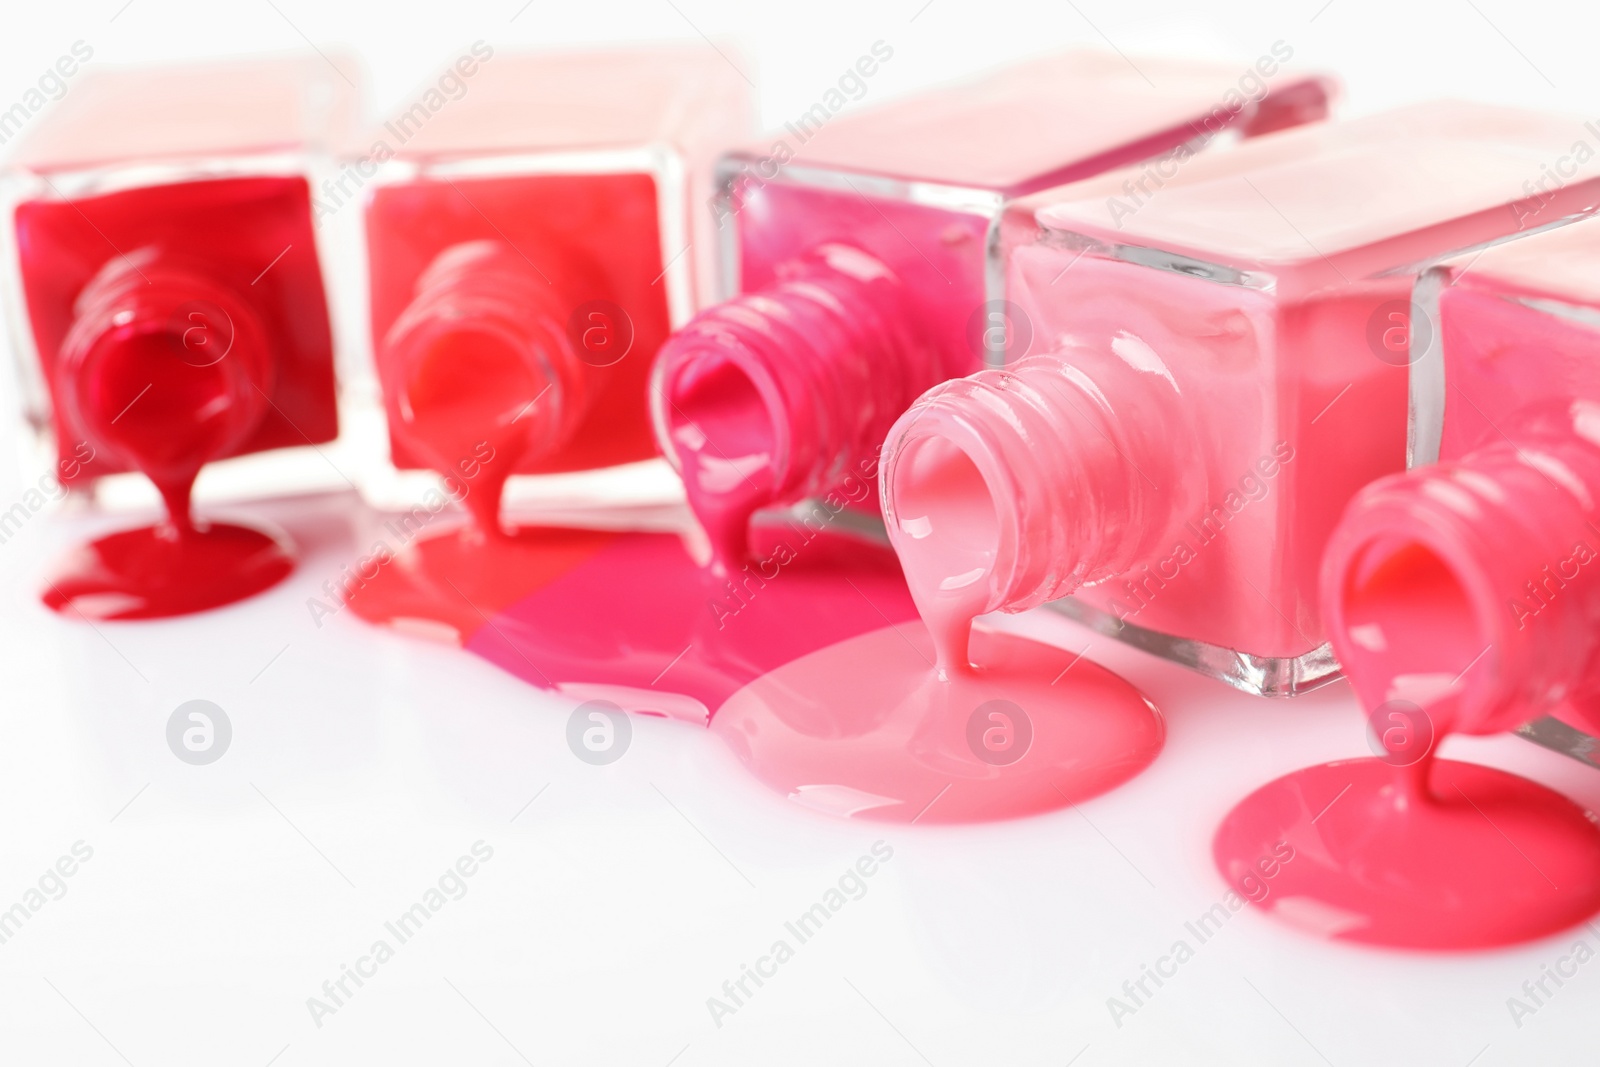 Photo of Spilled different nail polishes with bottles on white background, closeup